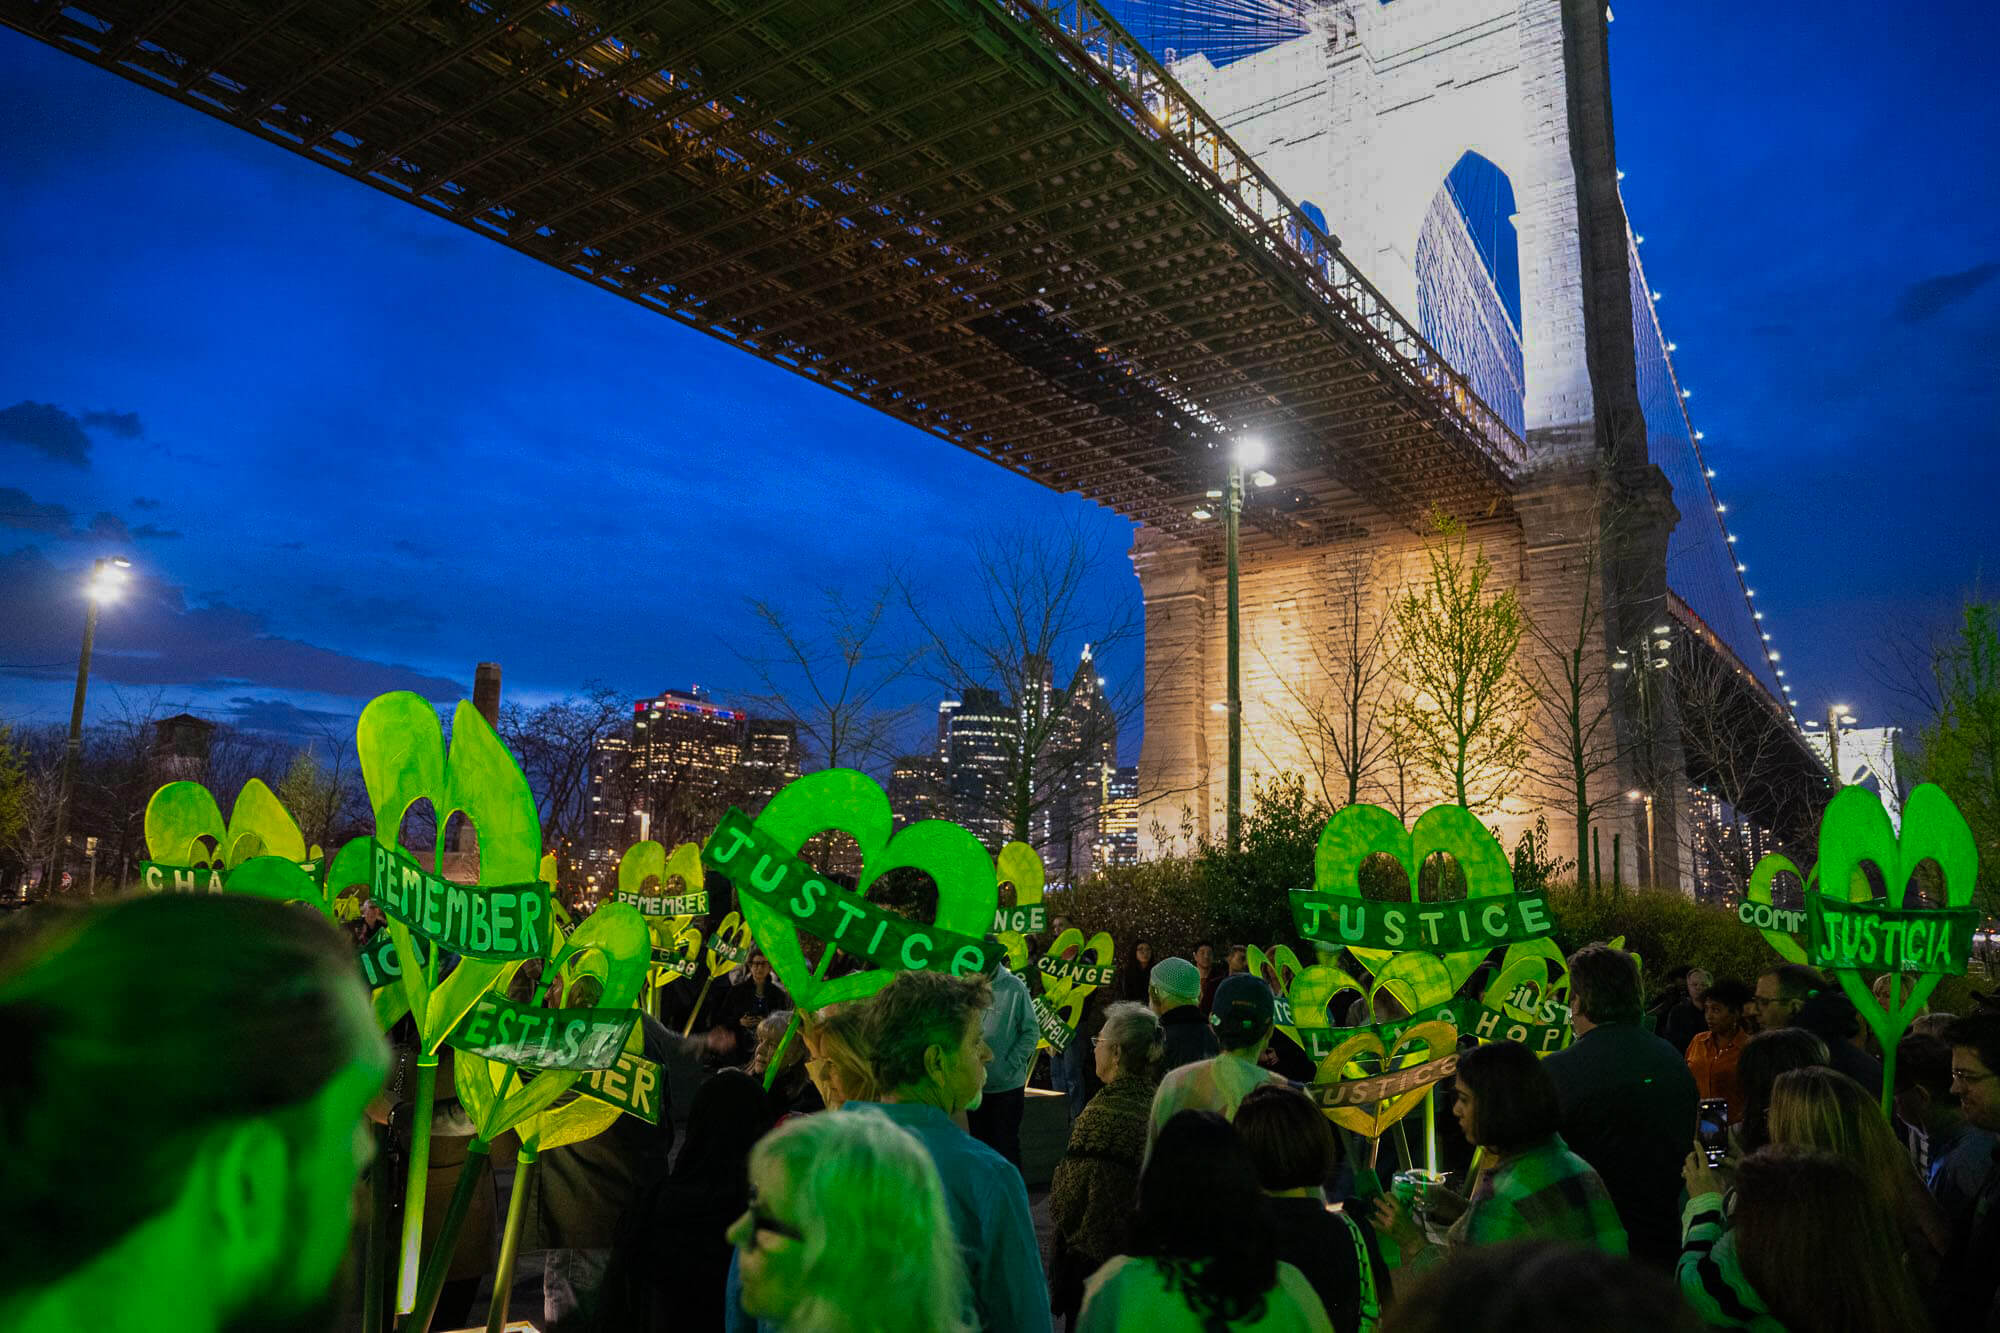 the play concludes outside underneath the Brooklyn Bridge